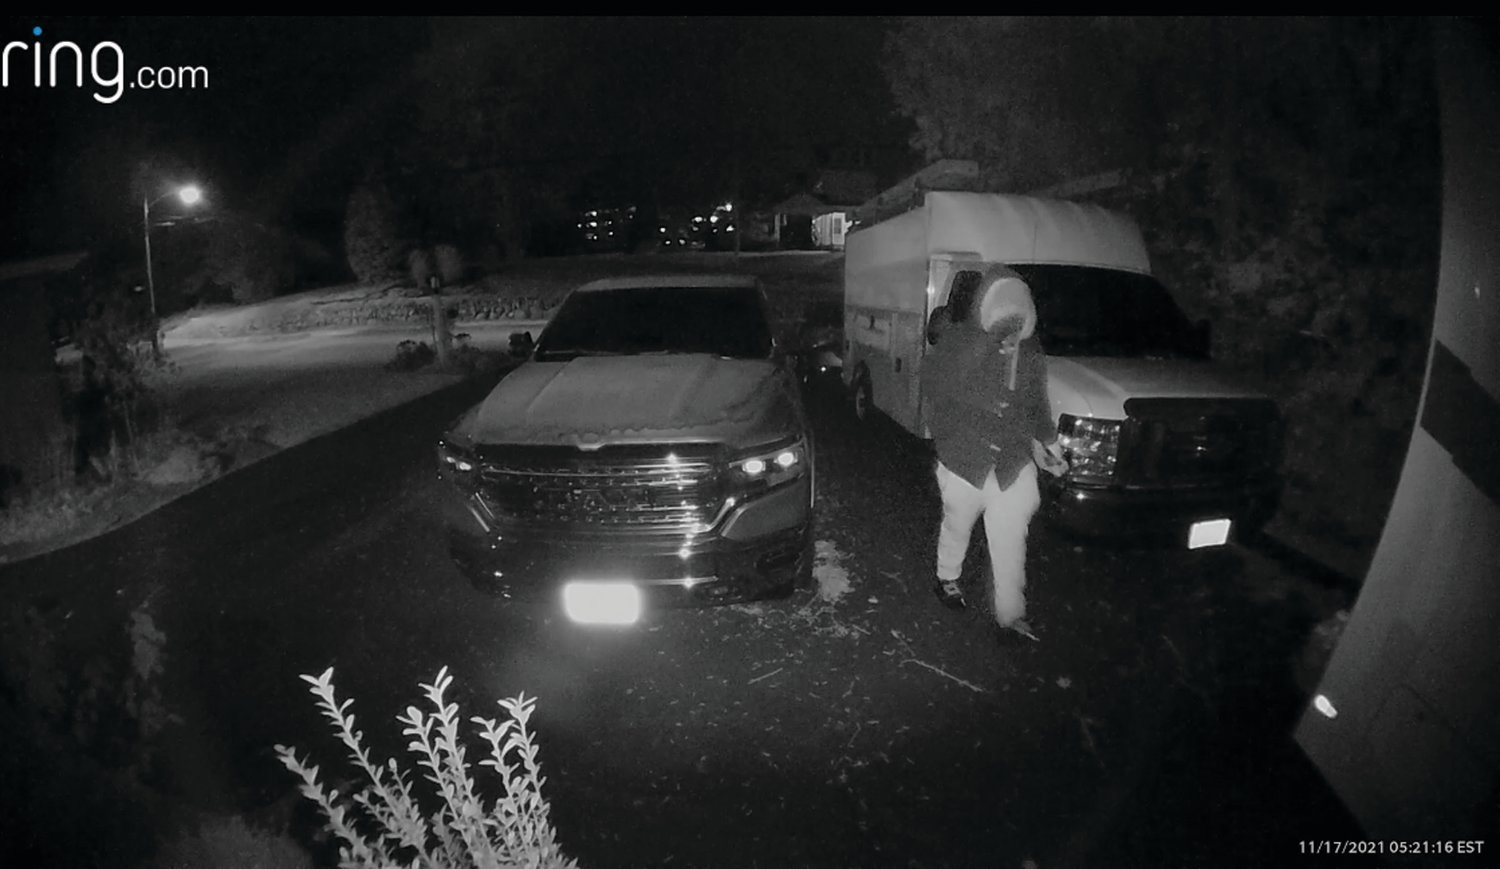 CAUGHT IN THE ACT: Johnston residents have been capturing images of the possible neighborhood thief from home surveillance cameras. If you capture suspicious footage, contact the Johnston Police Department (email crime tips to tips@johnstonpd.com, or call police to report a crime, at 401-231-8100).